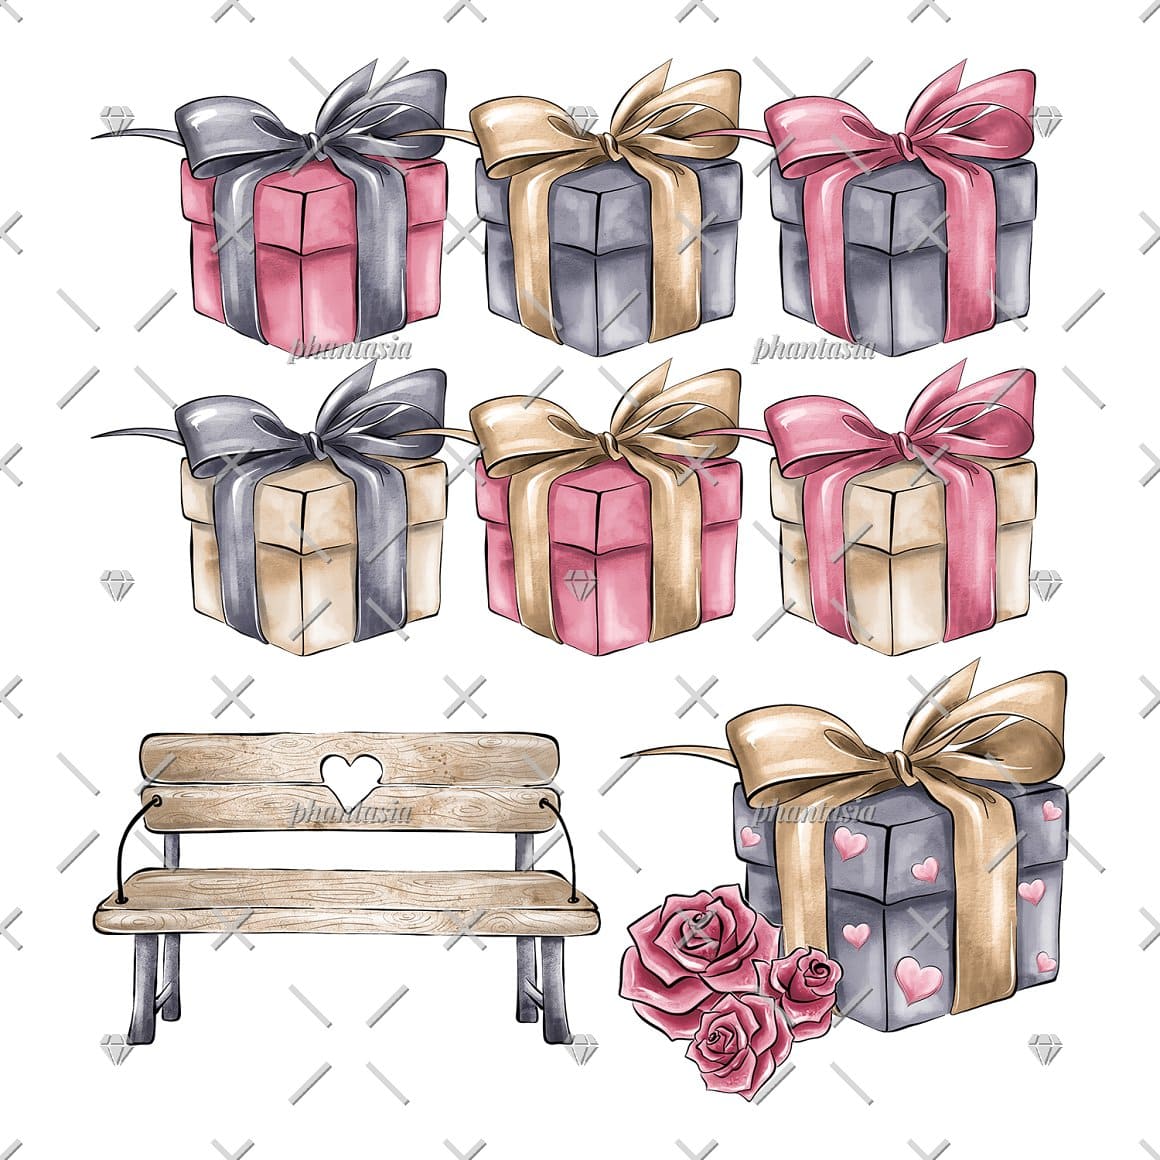 Gifts for Valentine's Day with bows in different colors.